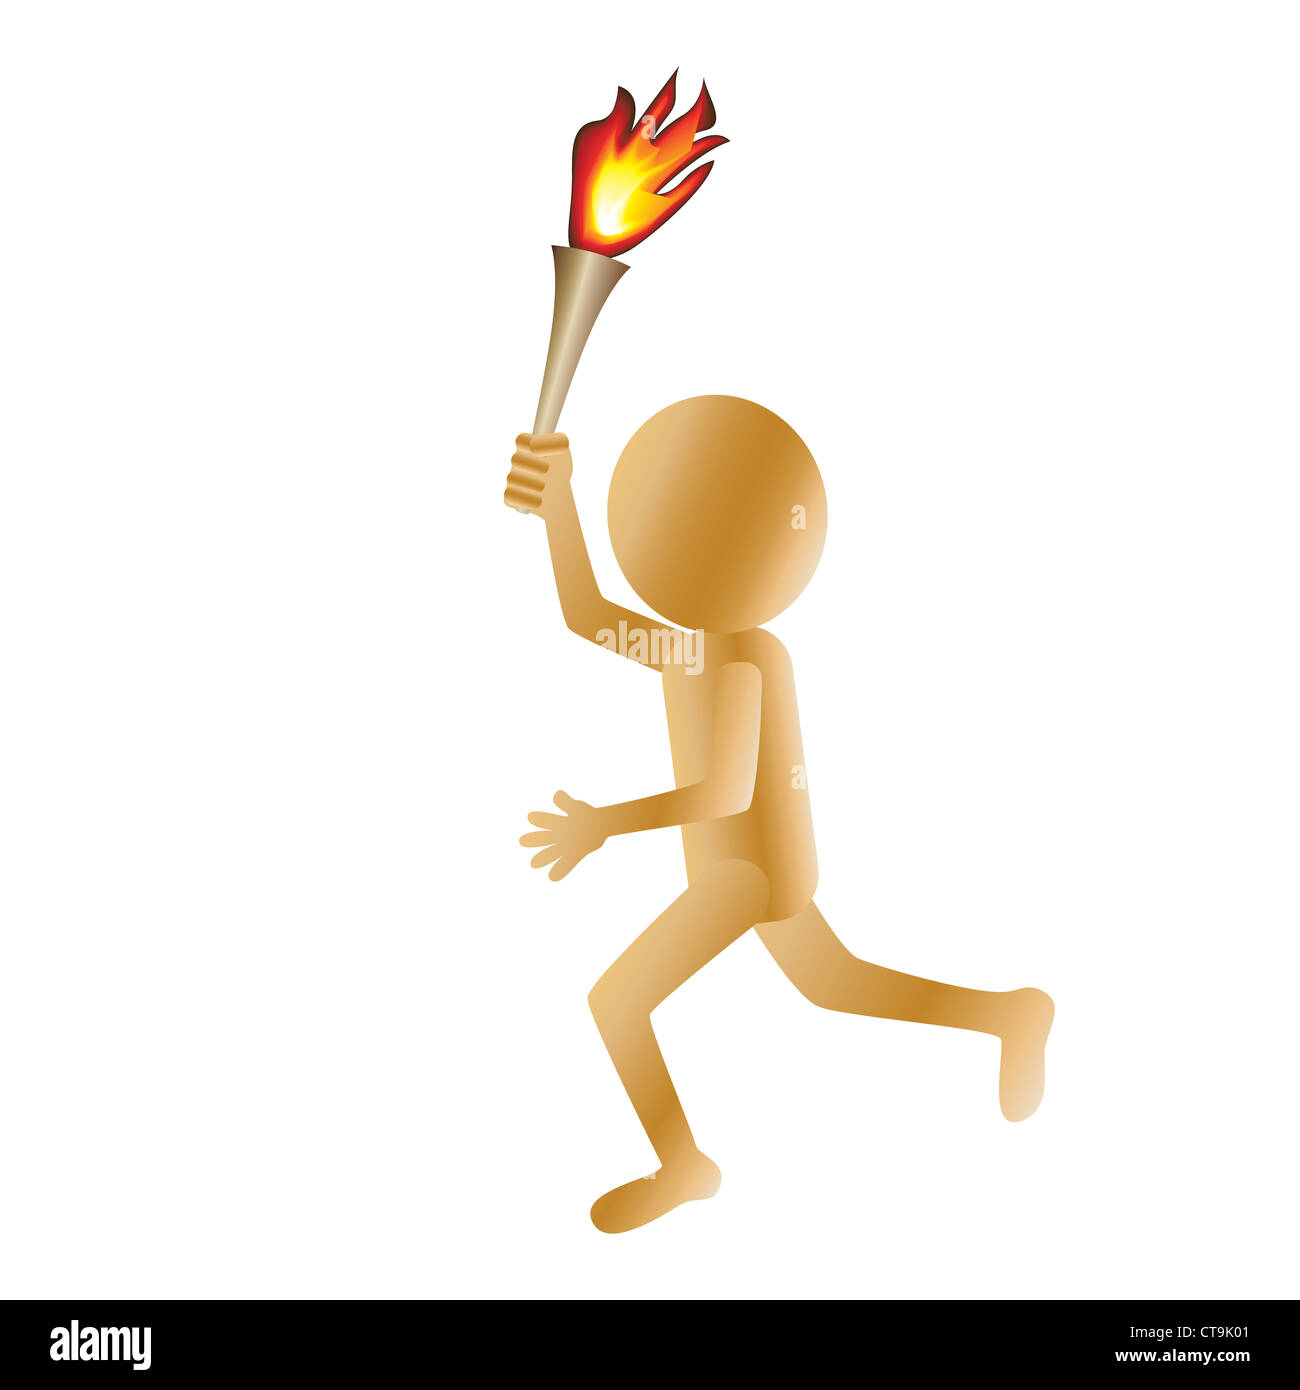 illustration of a running golden 3d man carrying a torch isolated in white background. Stock Photo